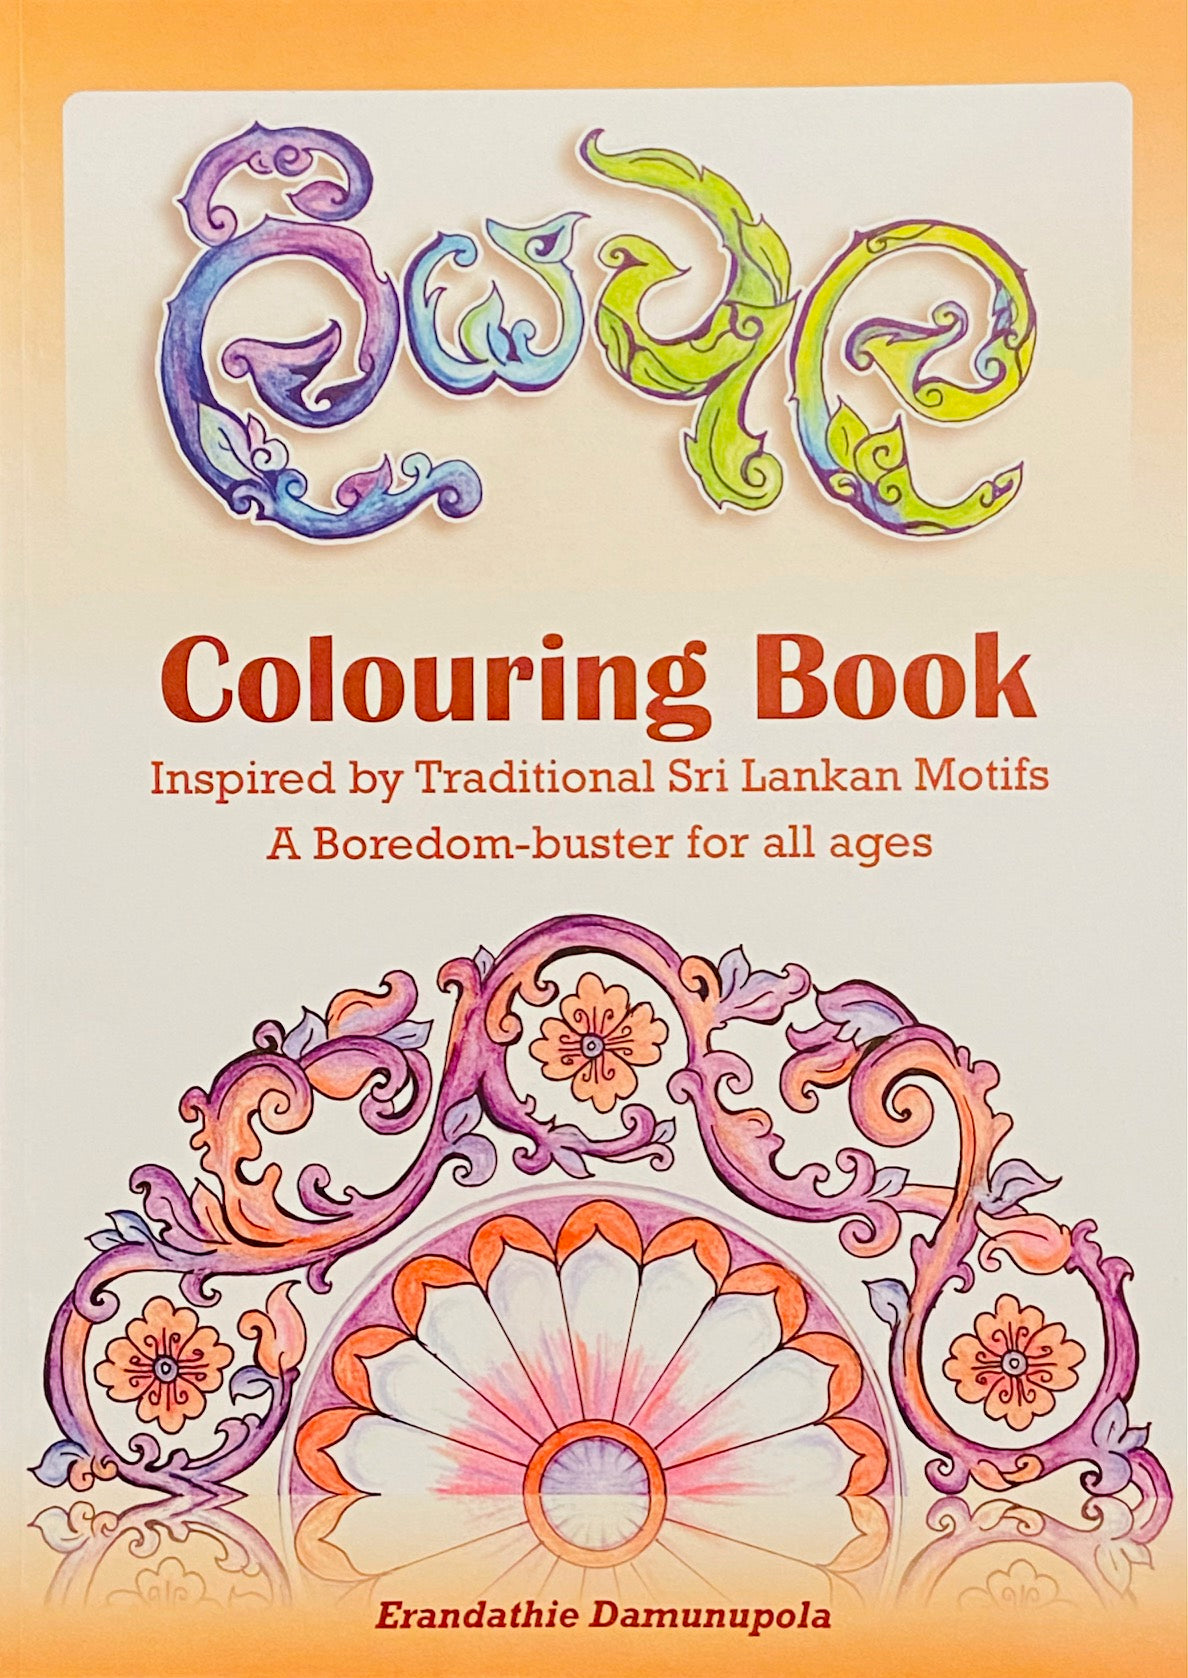 Liyawela Colouring Book: Inspired by Traditional Sri Lankan Motifs, A Boredom-Buster for all ages by Erandathie Damunupola